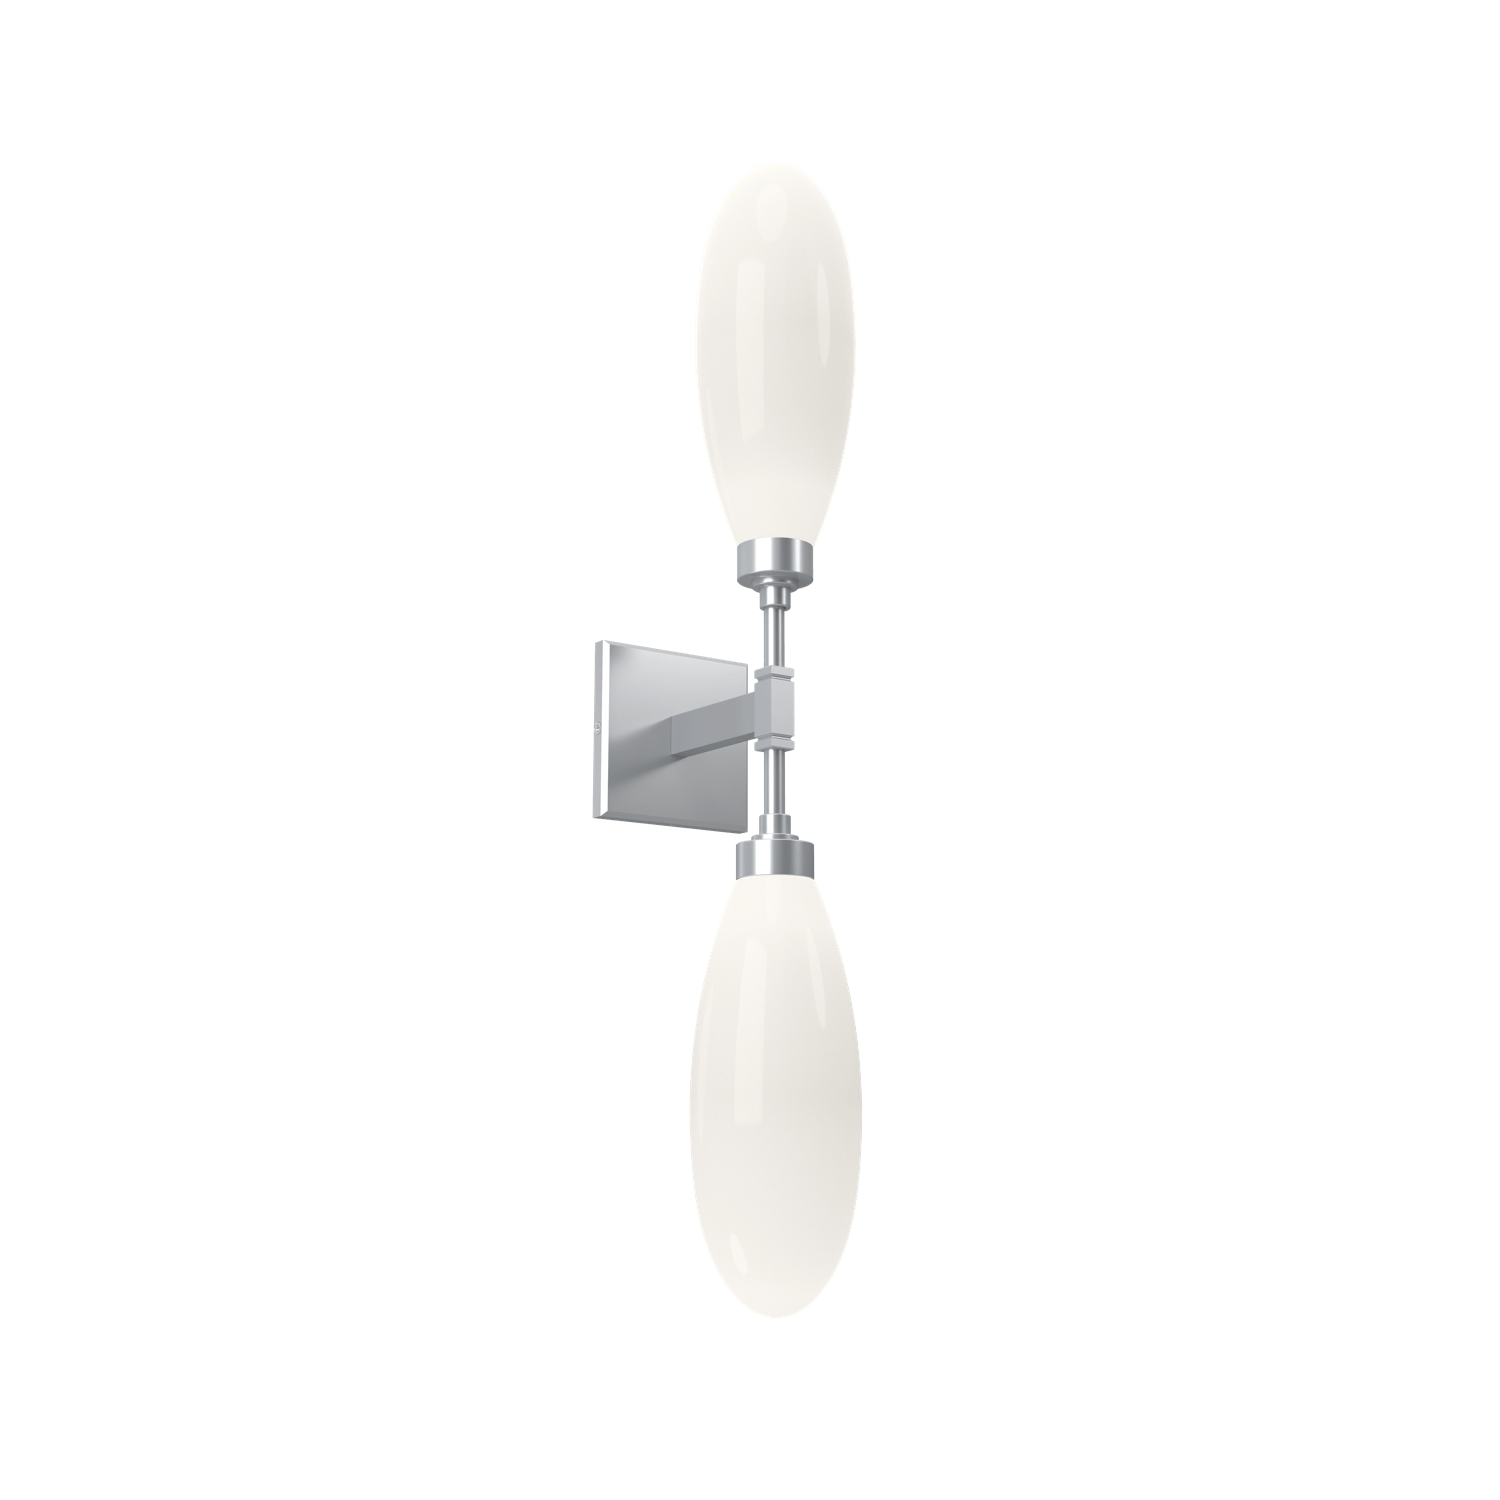 IDB0071-02-CS-WL-LL-Hammerton-Studio-Fiori-double-wall-sconce-with-classic-silver-finish-and-opal-white-glass-shades-and-LED-lamping